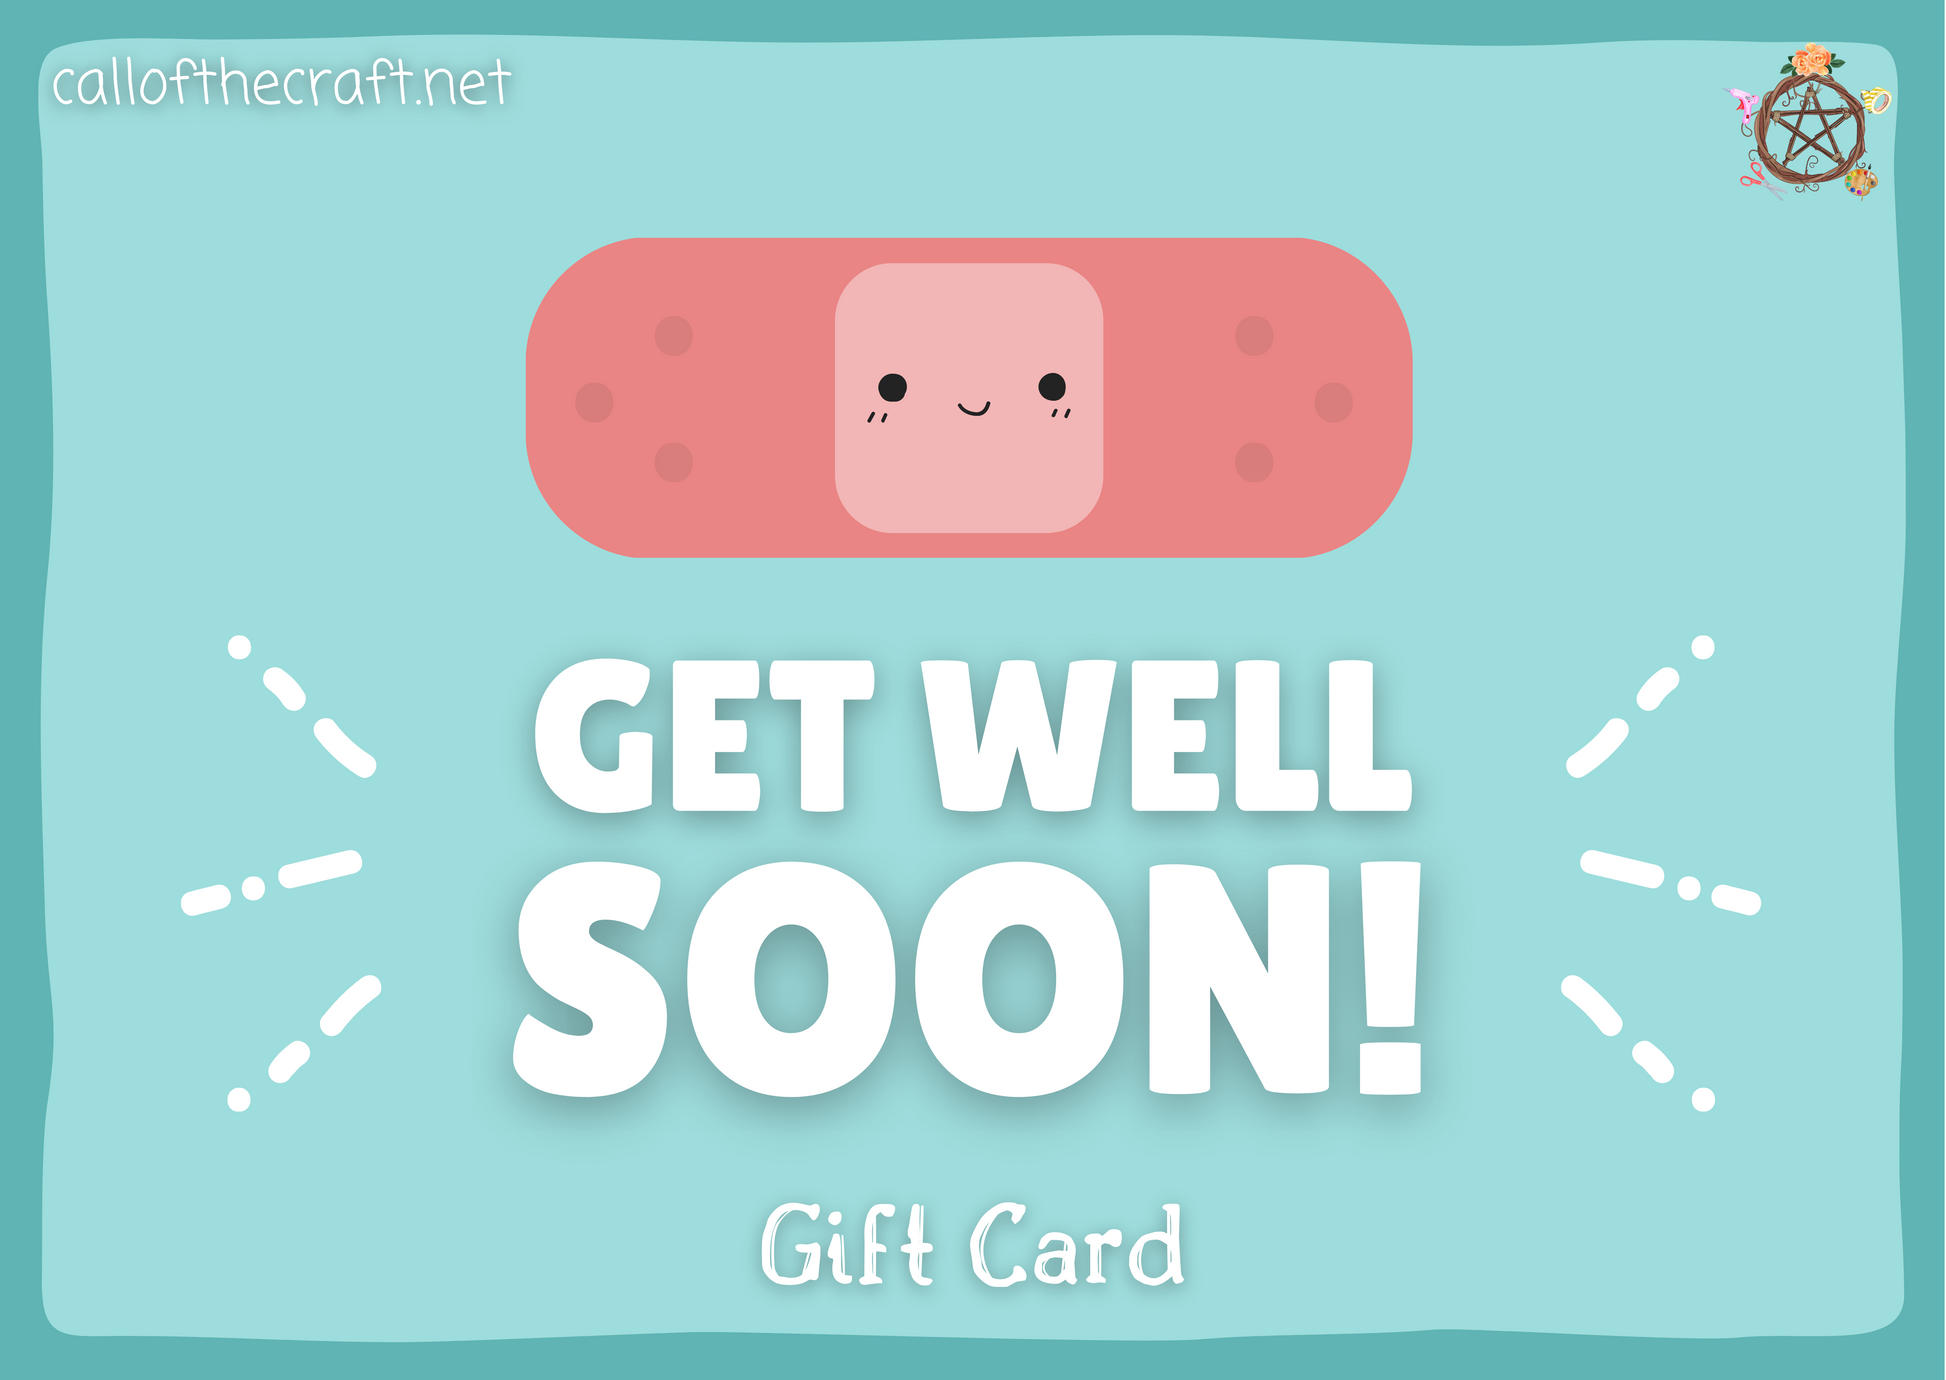 Get Well Soon Gift Card - The Call of the Craft